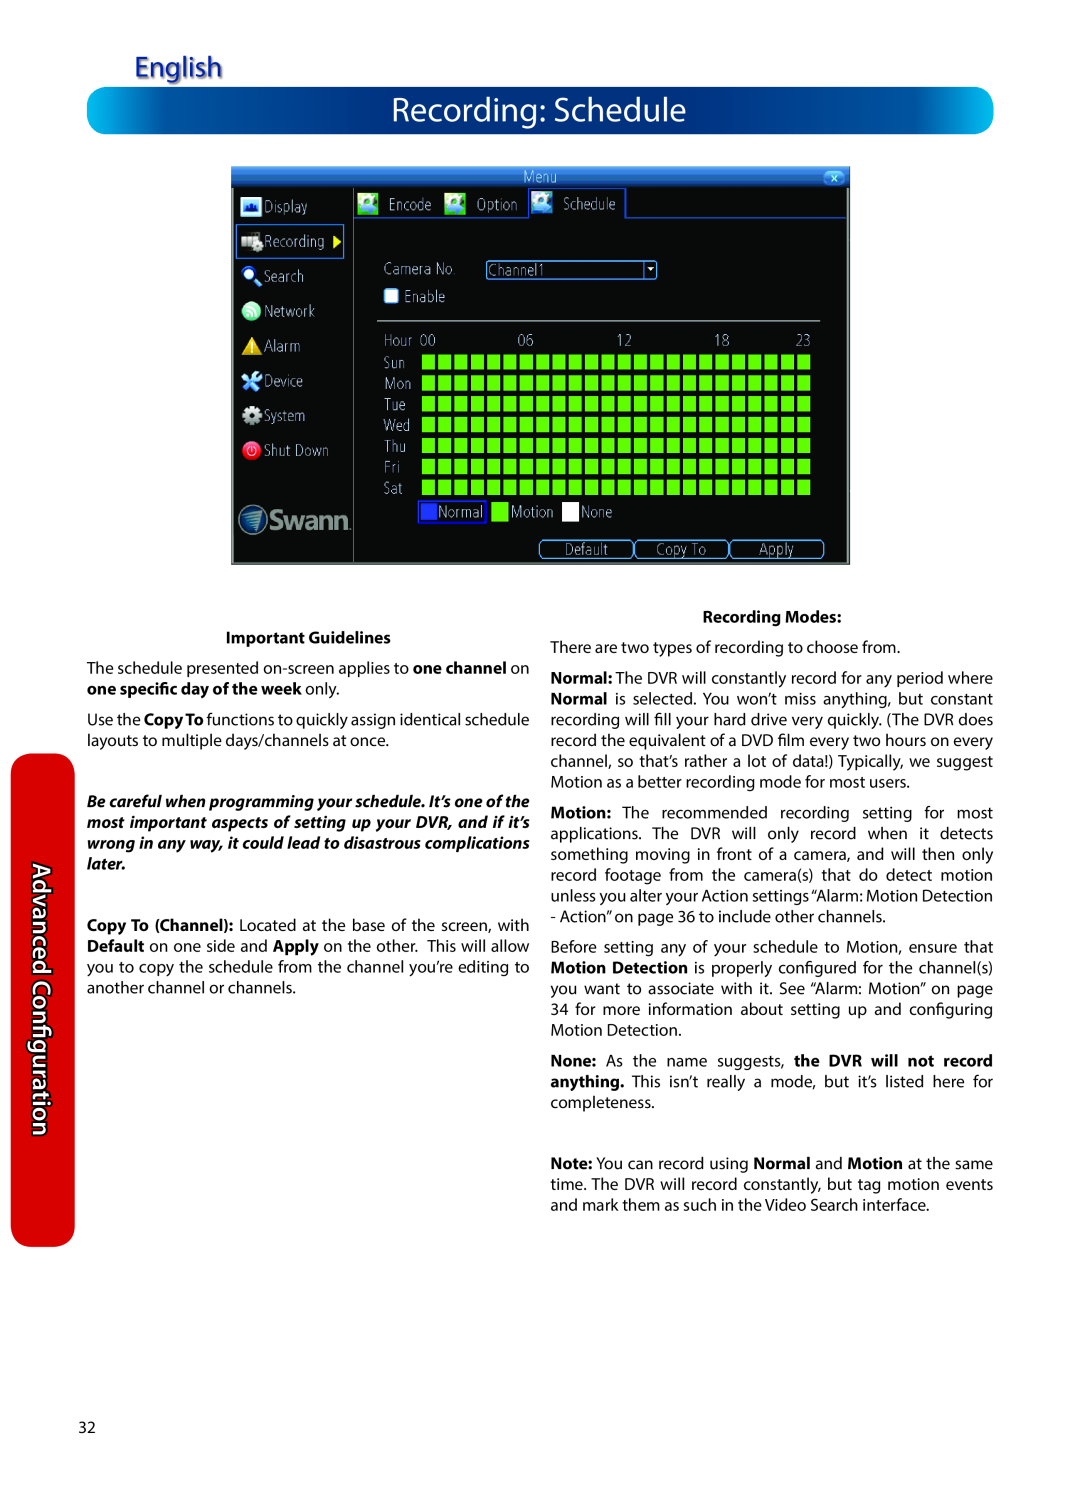 Swann H.264 manual Recording: Schedule, English, Advanced Configuration, Important Guidelines, Recording Modes 